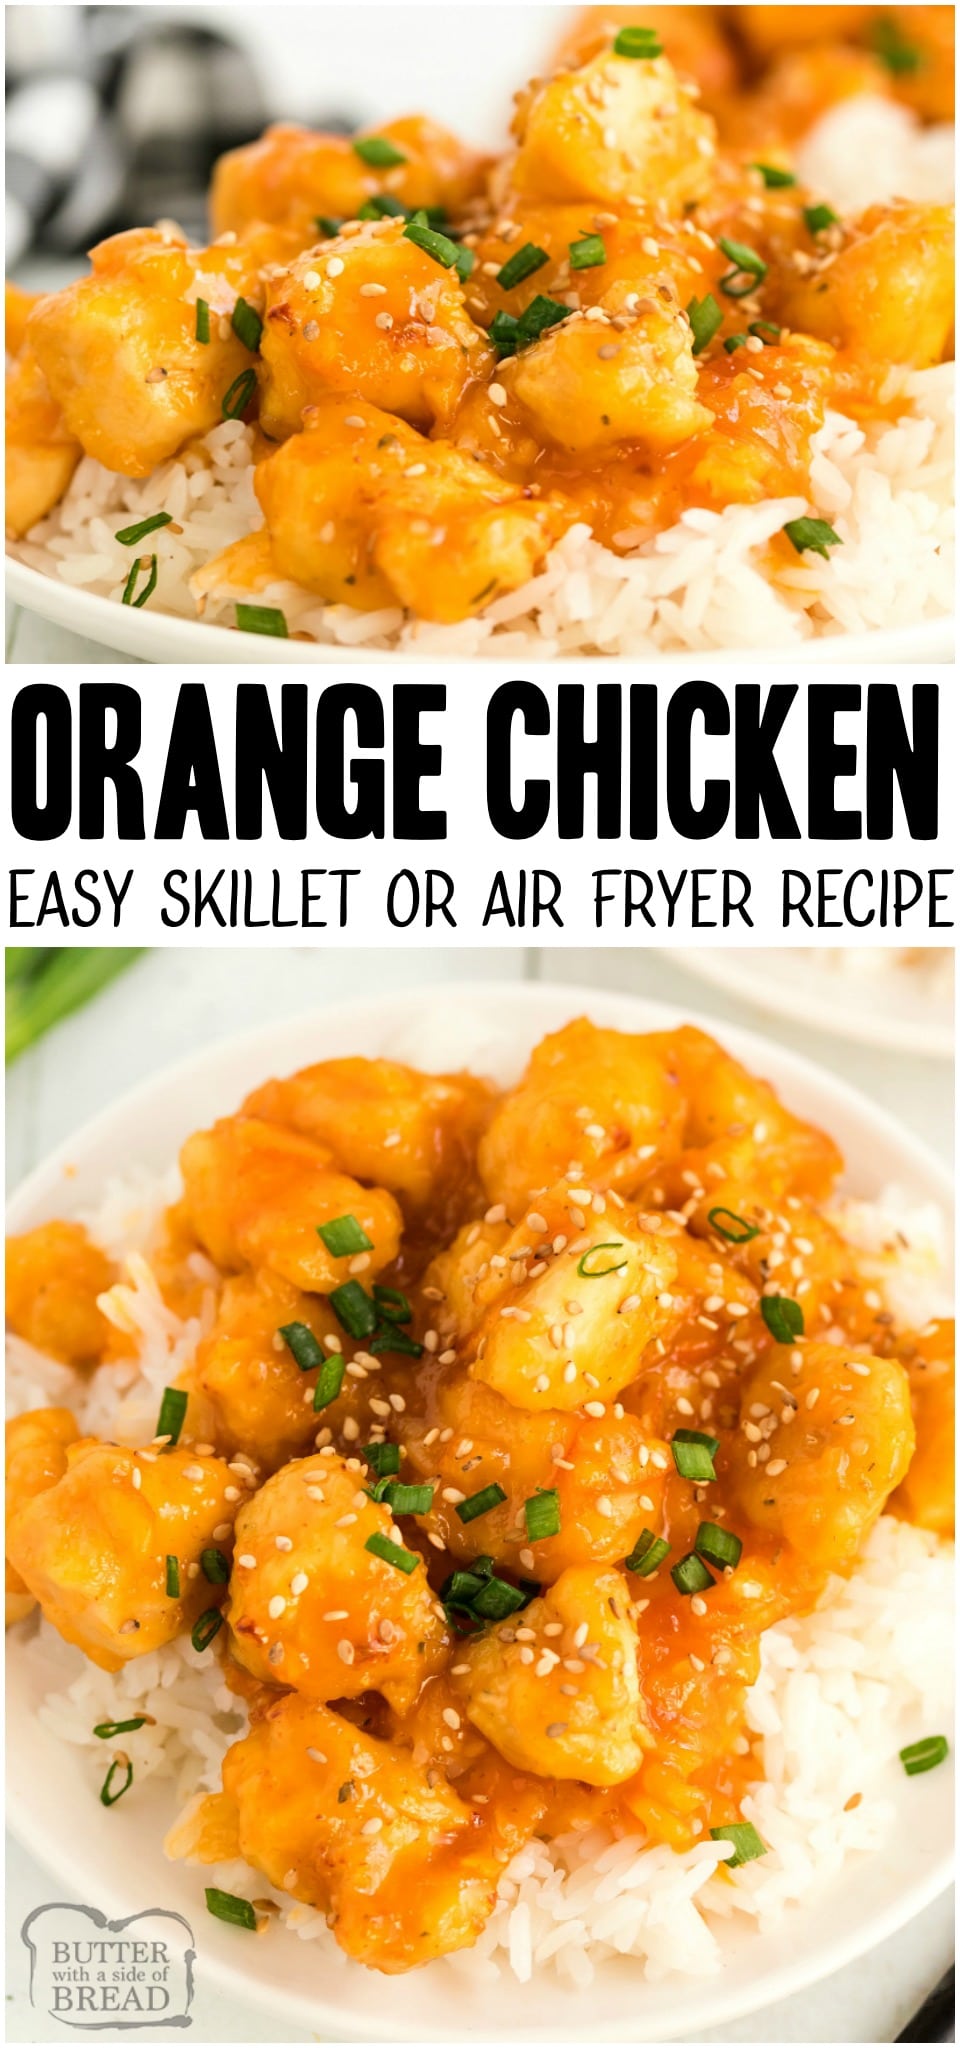 Homemade Orange Chicken made with a sweet & savory orange sauce and tender breaded chicken. This orange chicken recipe with orange marmalade is simple and perfect alongside white rice! #chicken #dinner #orange #asianrecipe #orangechicken #easyrecipe #chickendinner from BUTTER WITH A SIDE OF BREAD